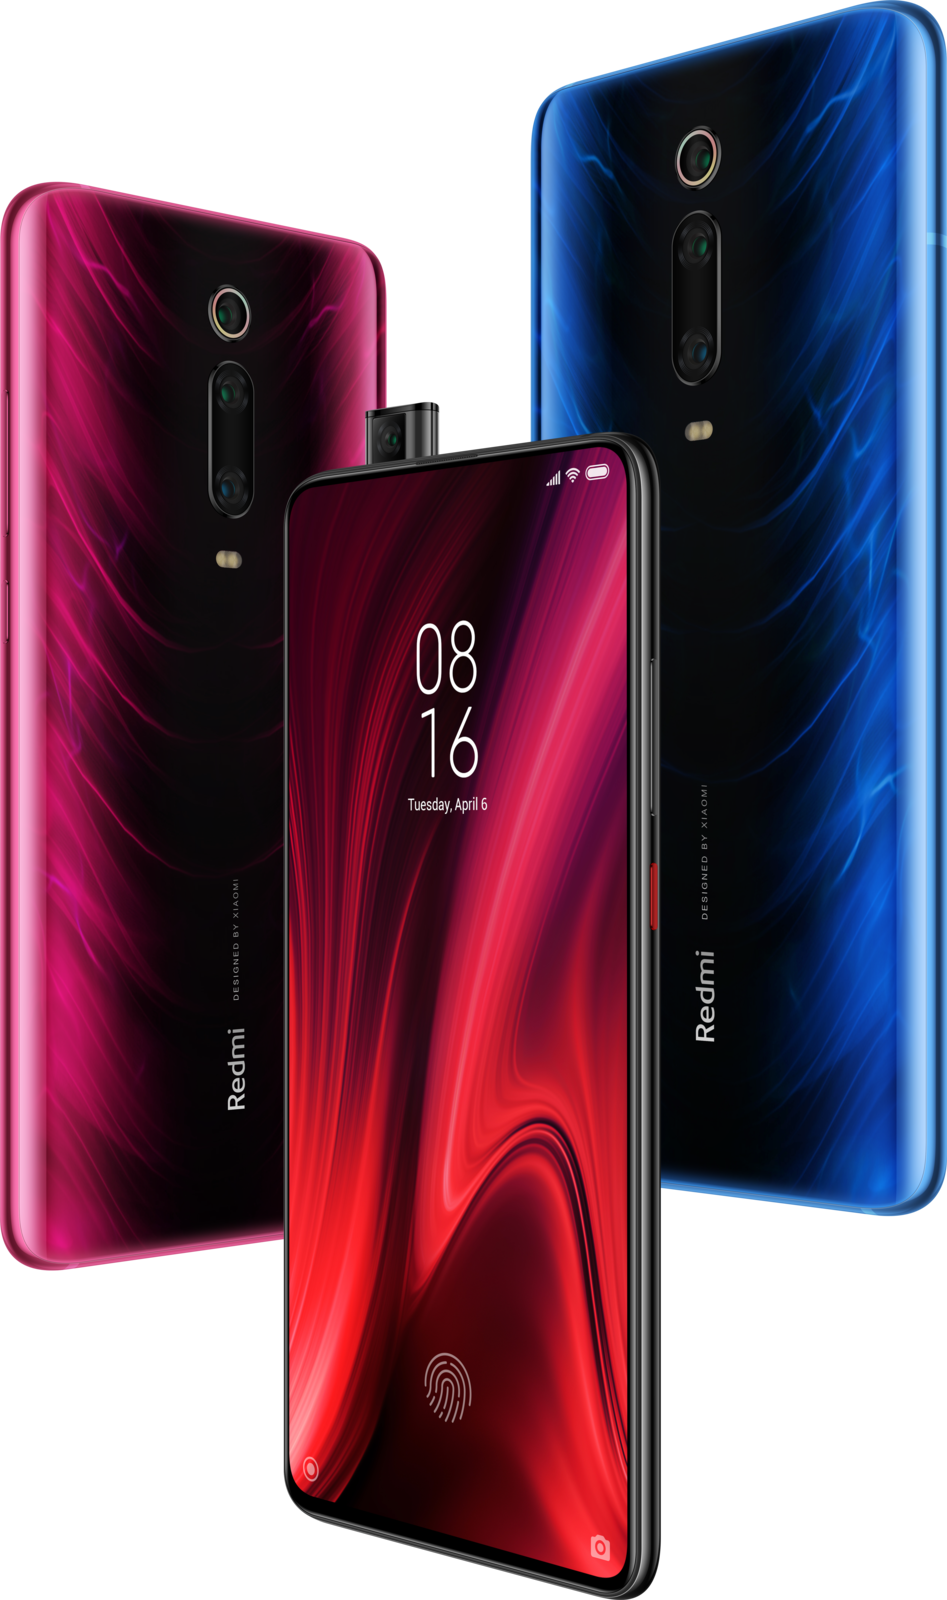 Pocophone in a new avatar? Xiaomi launches the Redmi K20 and K20 Pro in